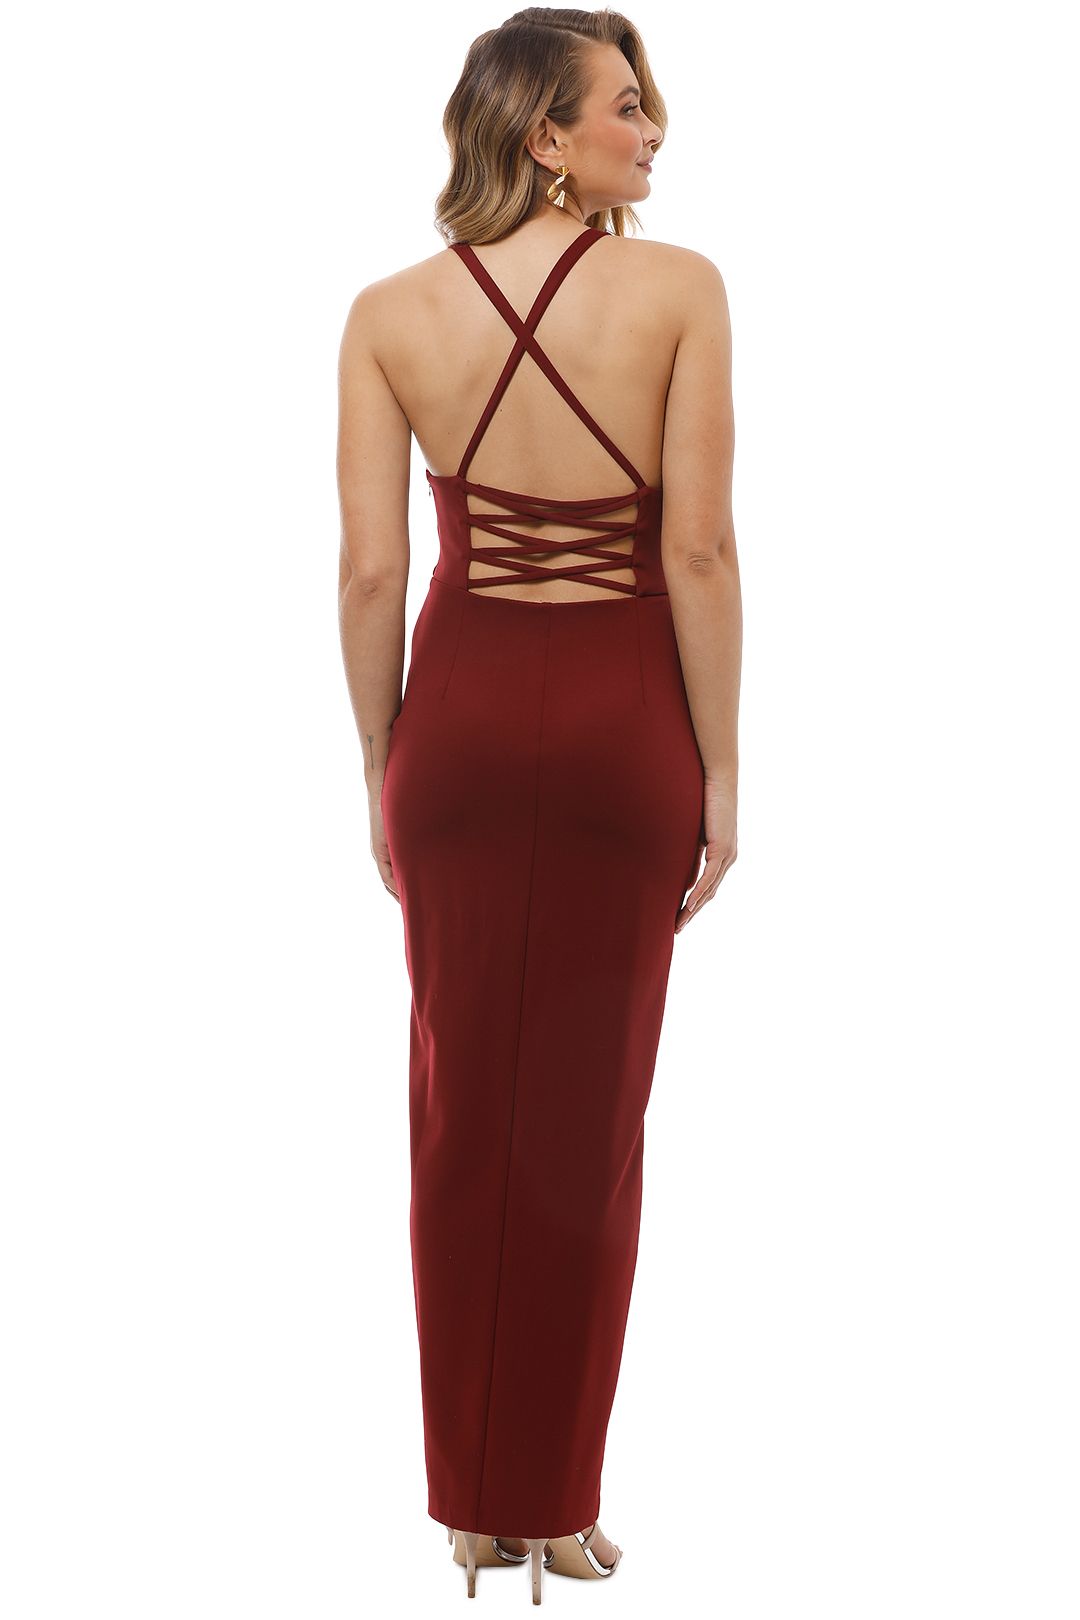 Grace and Hart - Gold Rush Neon Gown - Wine Red - Back